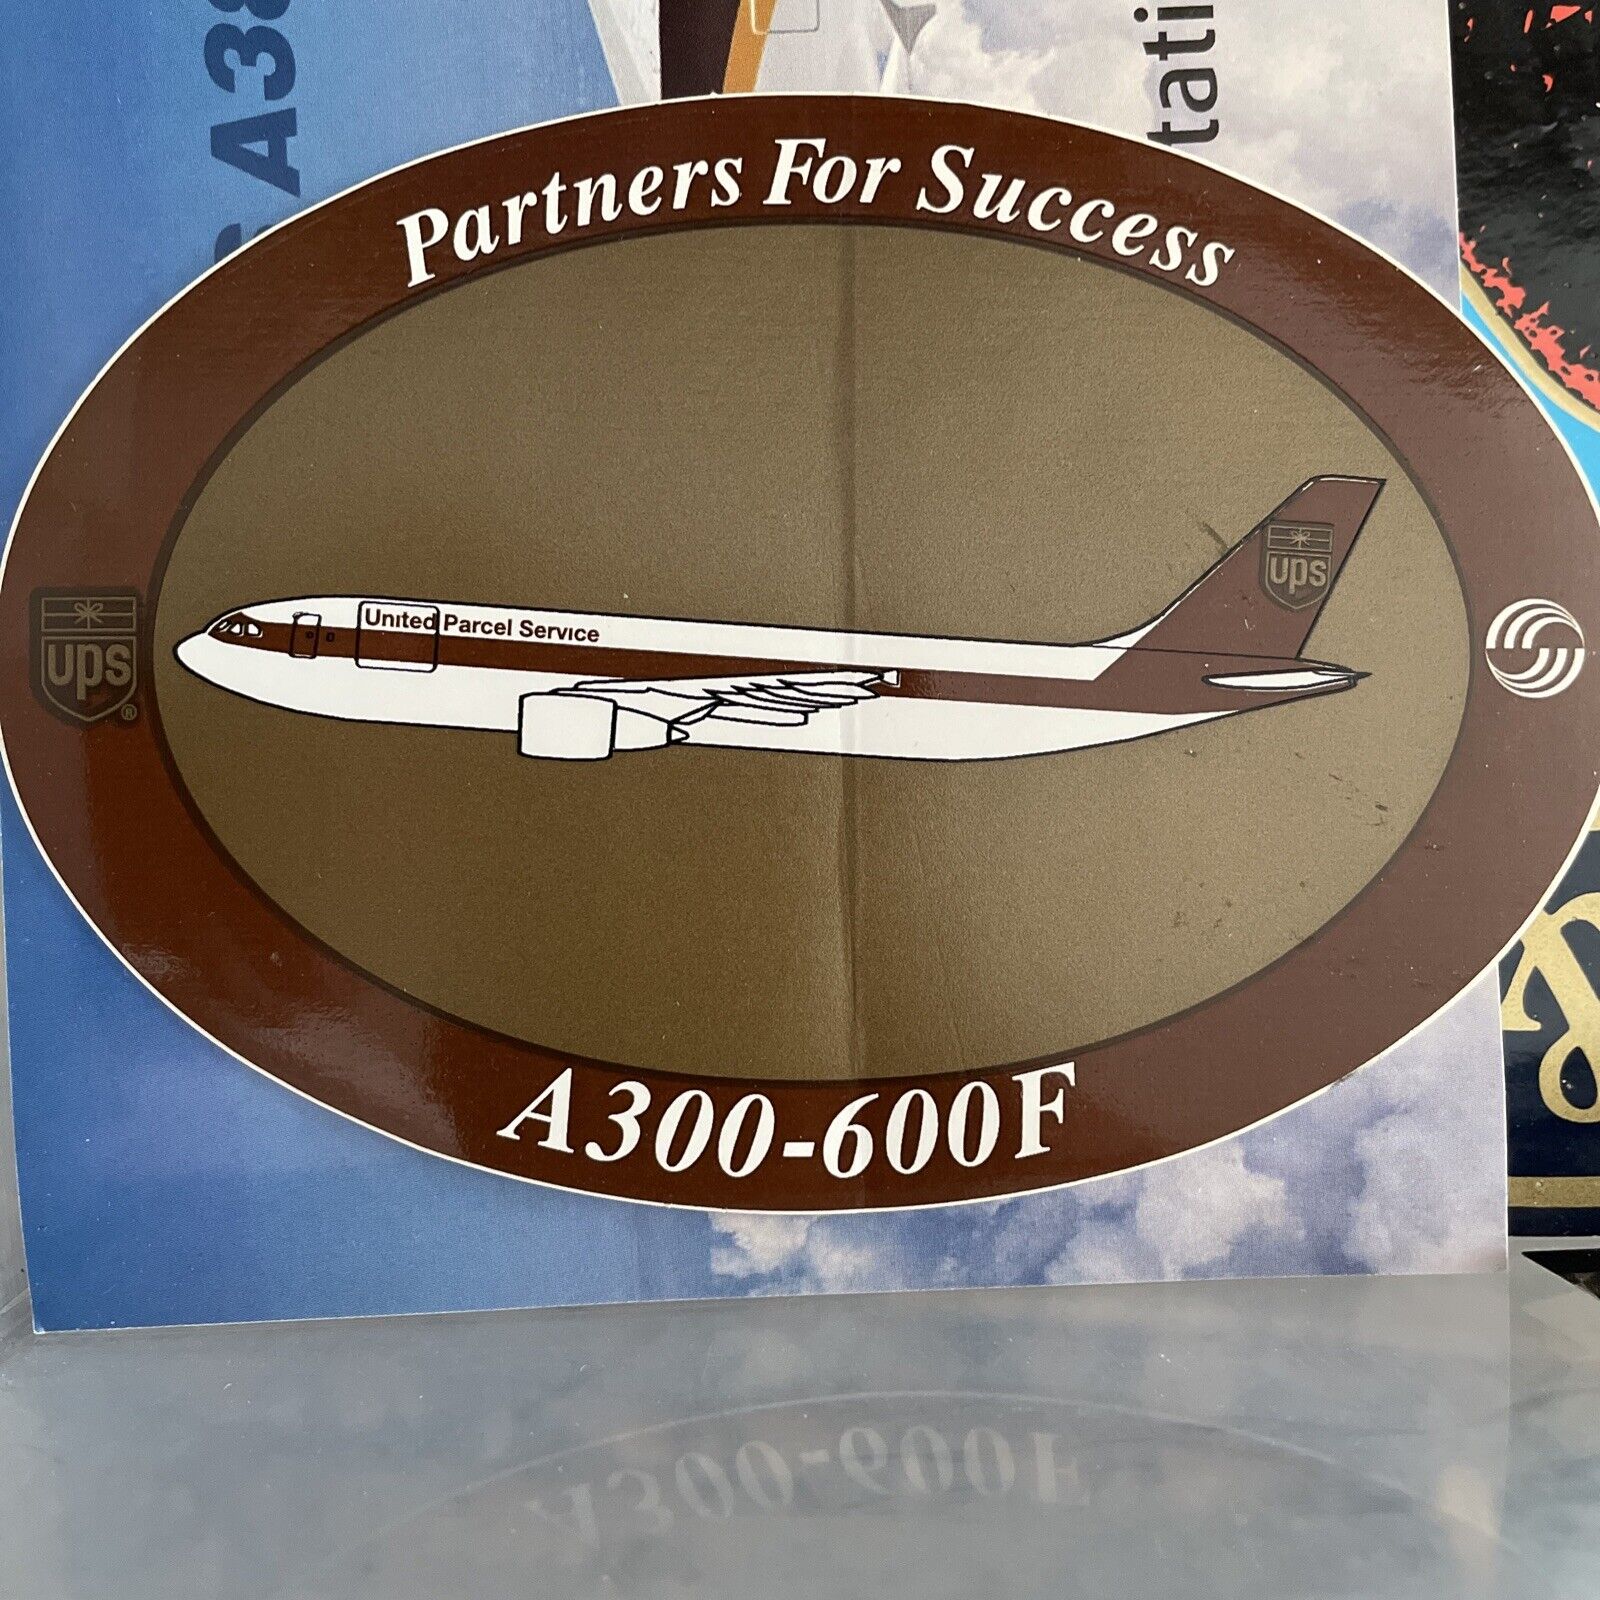 UPS United Parcel Service A300-600F Partners For Success sticker New